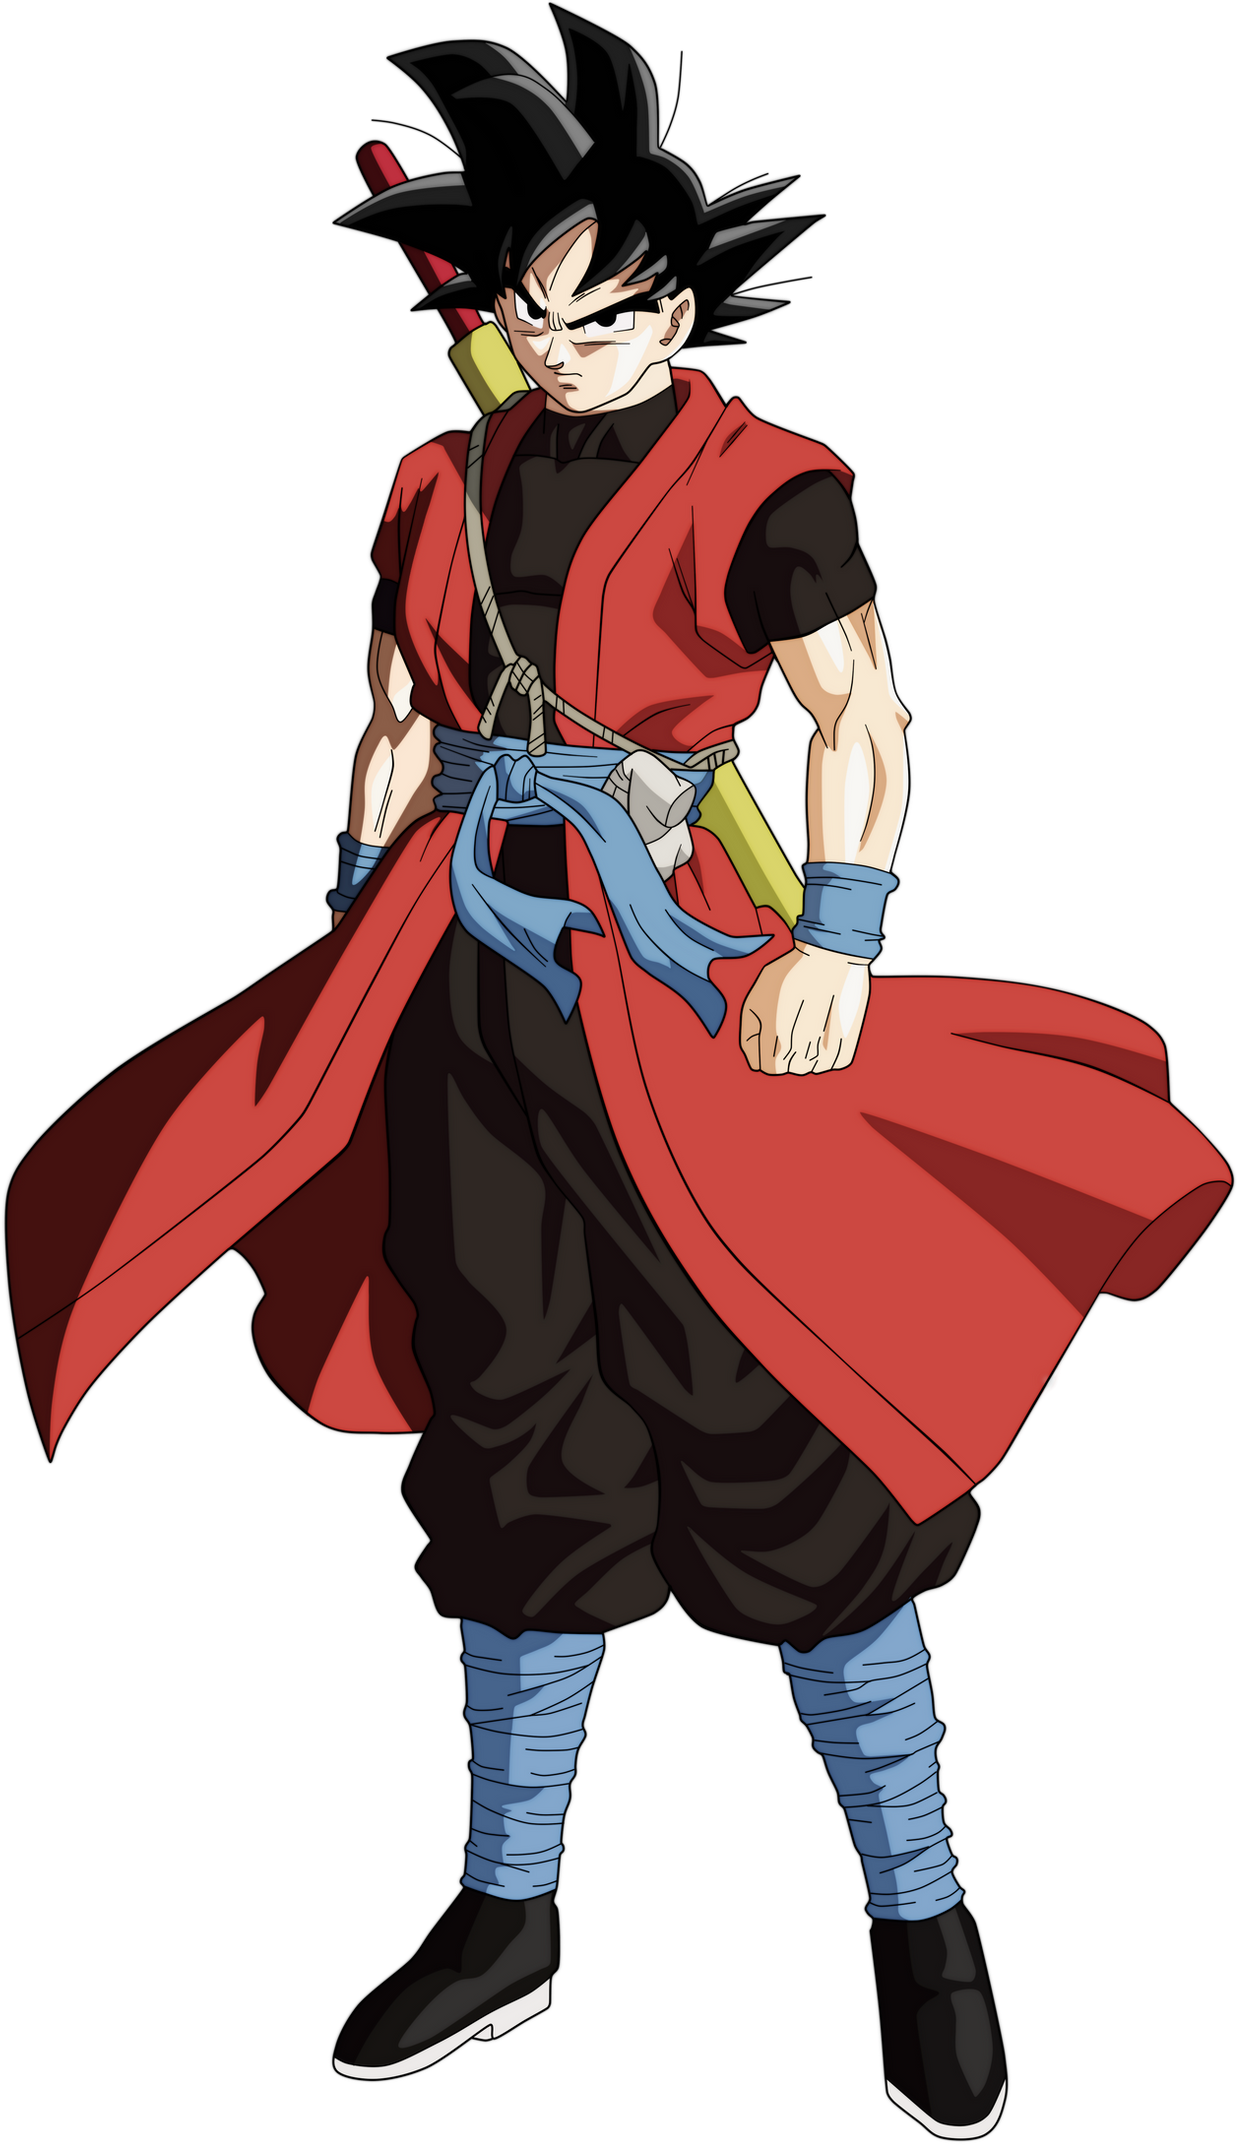 Super Dragon Ball Heroes Episode 46 Discussion - Forums 